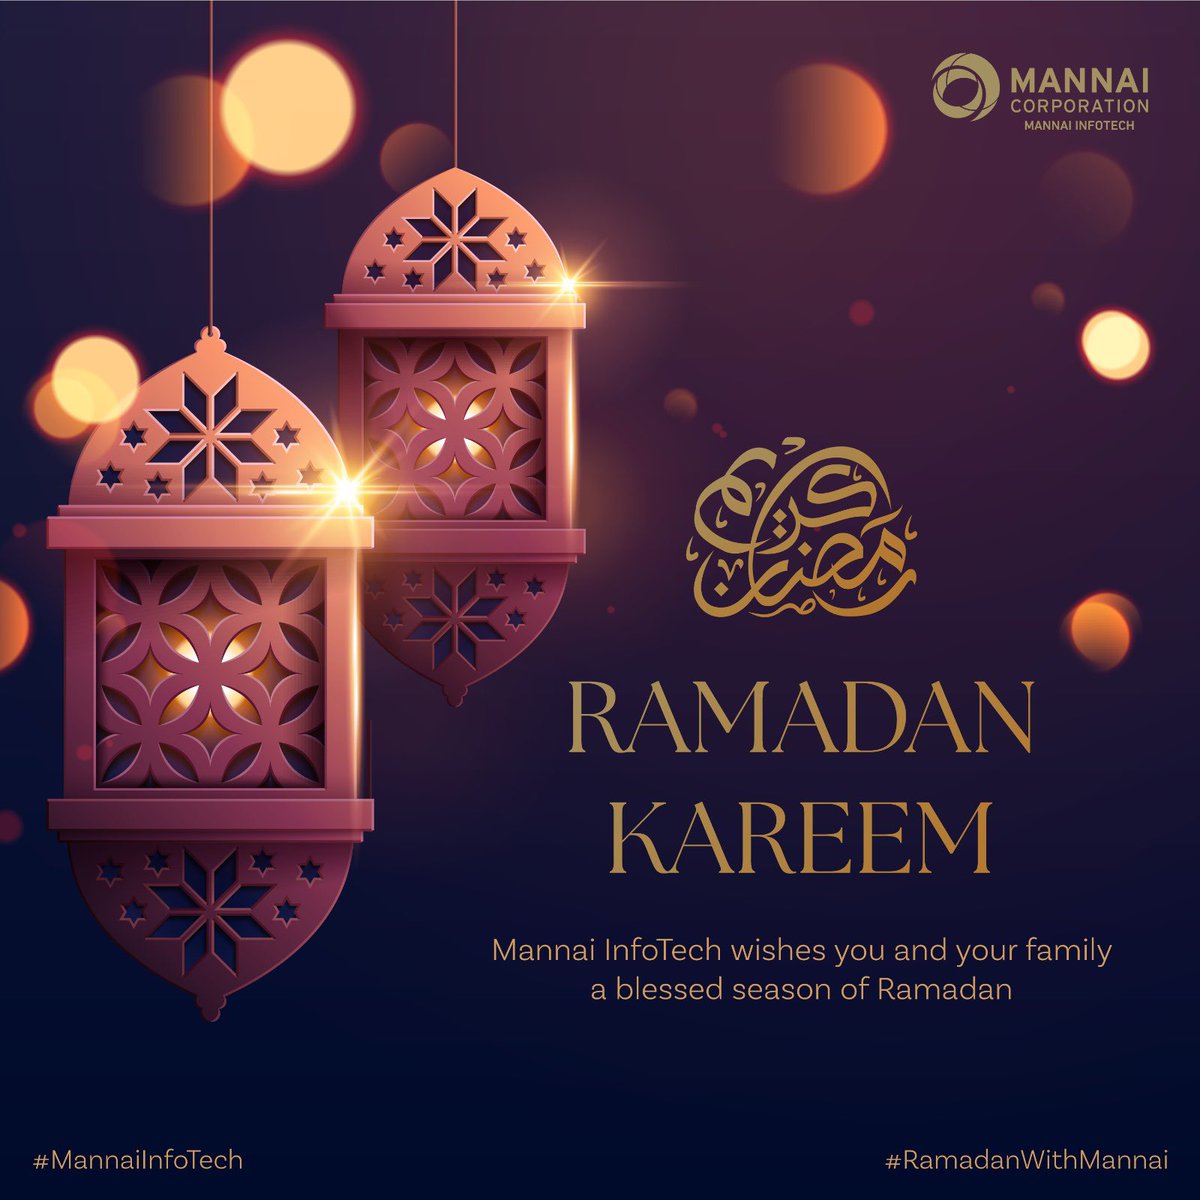 Wishing you all a blessed Ramadan As we embrace the holy month of Ramadan, Mannai InfoTech extends its warmest greetings to each & every one of you. May this sacred time be filled with abundant blessings, peace, and joy for you and your loved ones. #RamadanwithMannai #MannaiICT